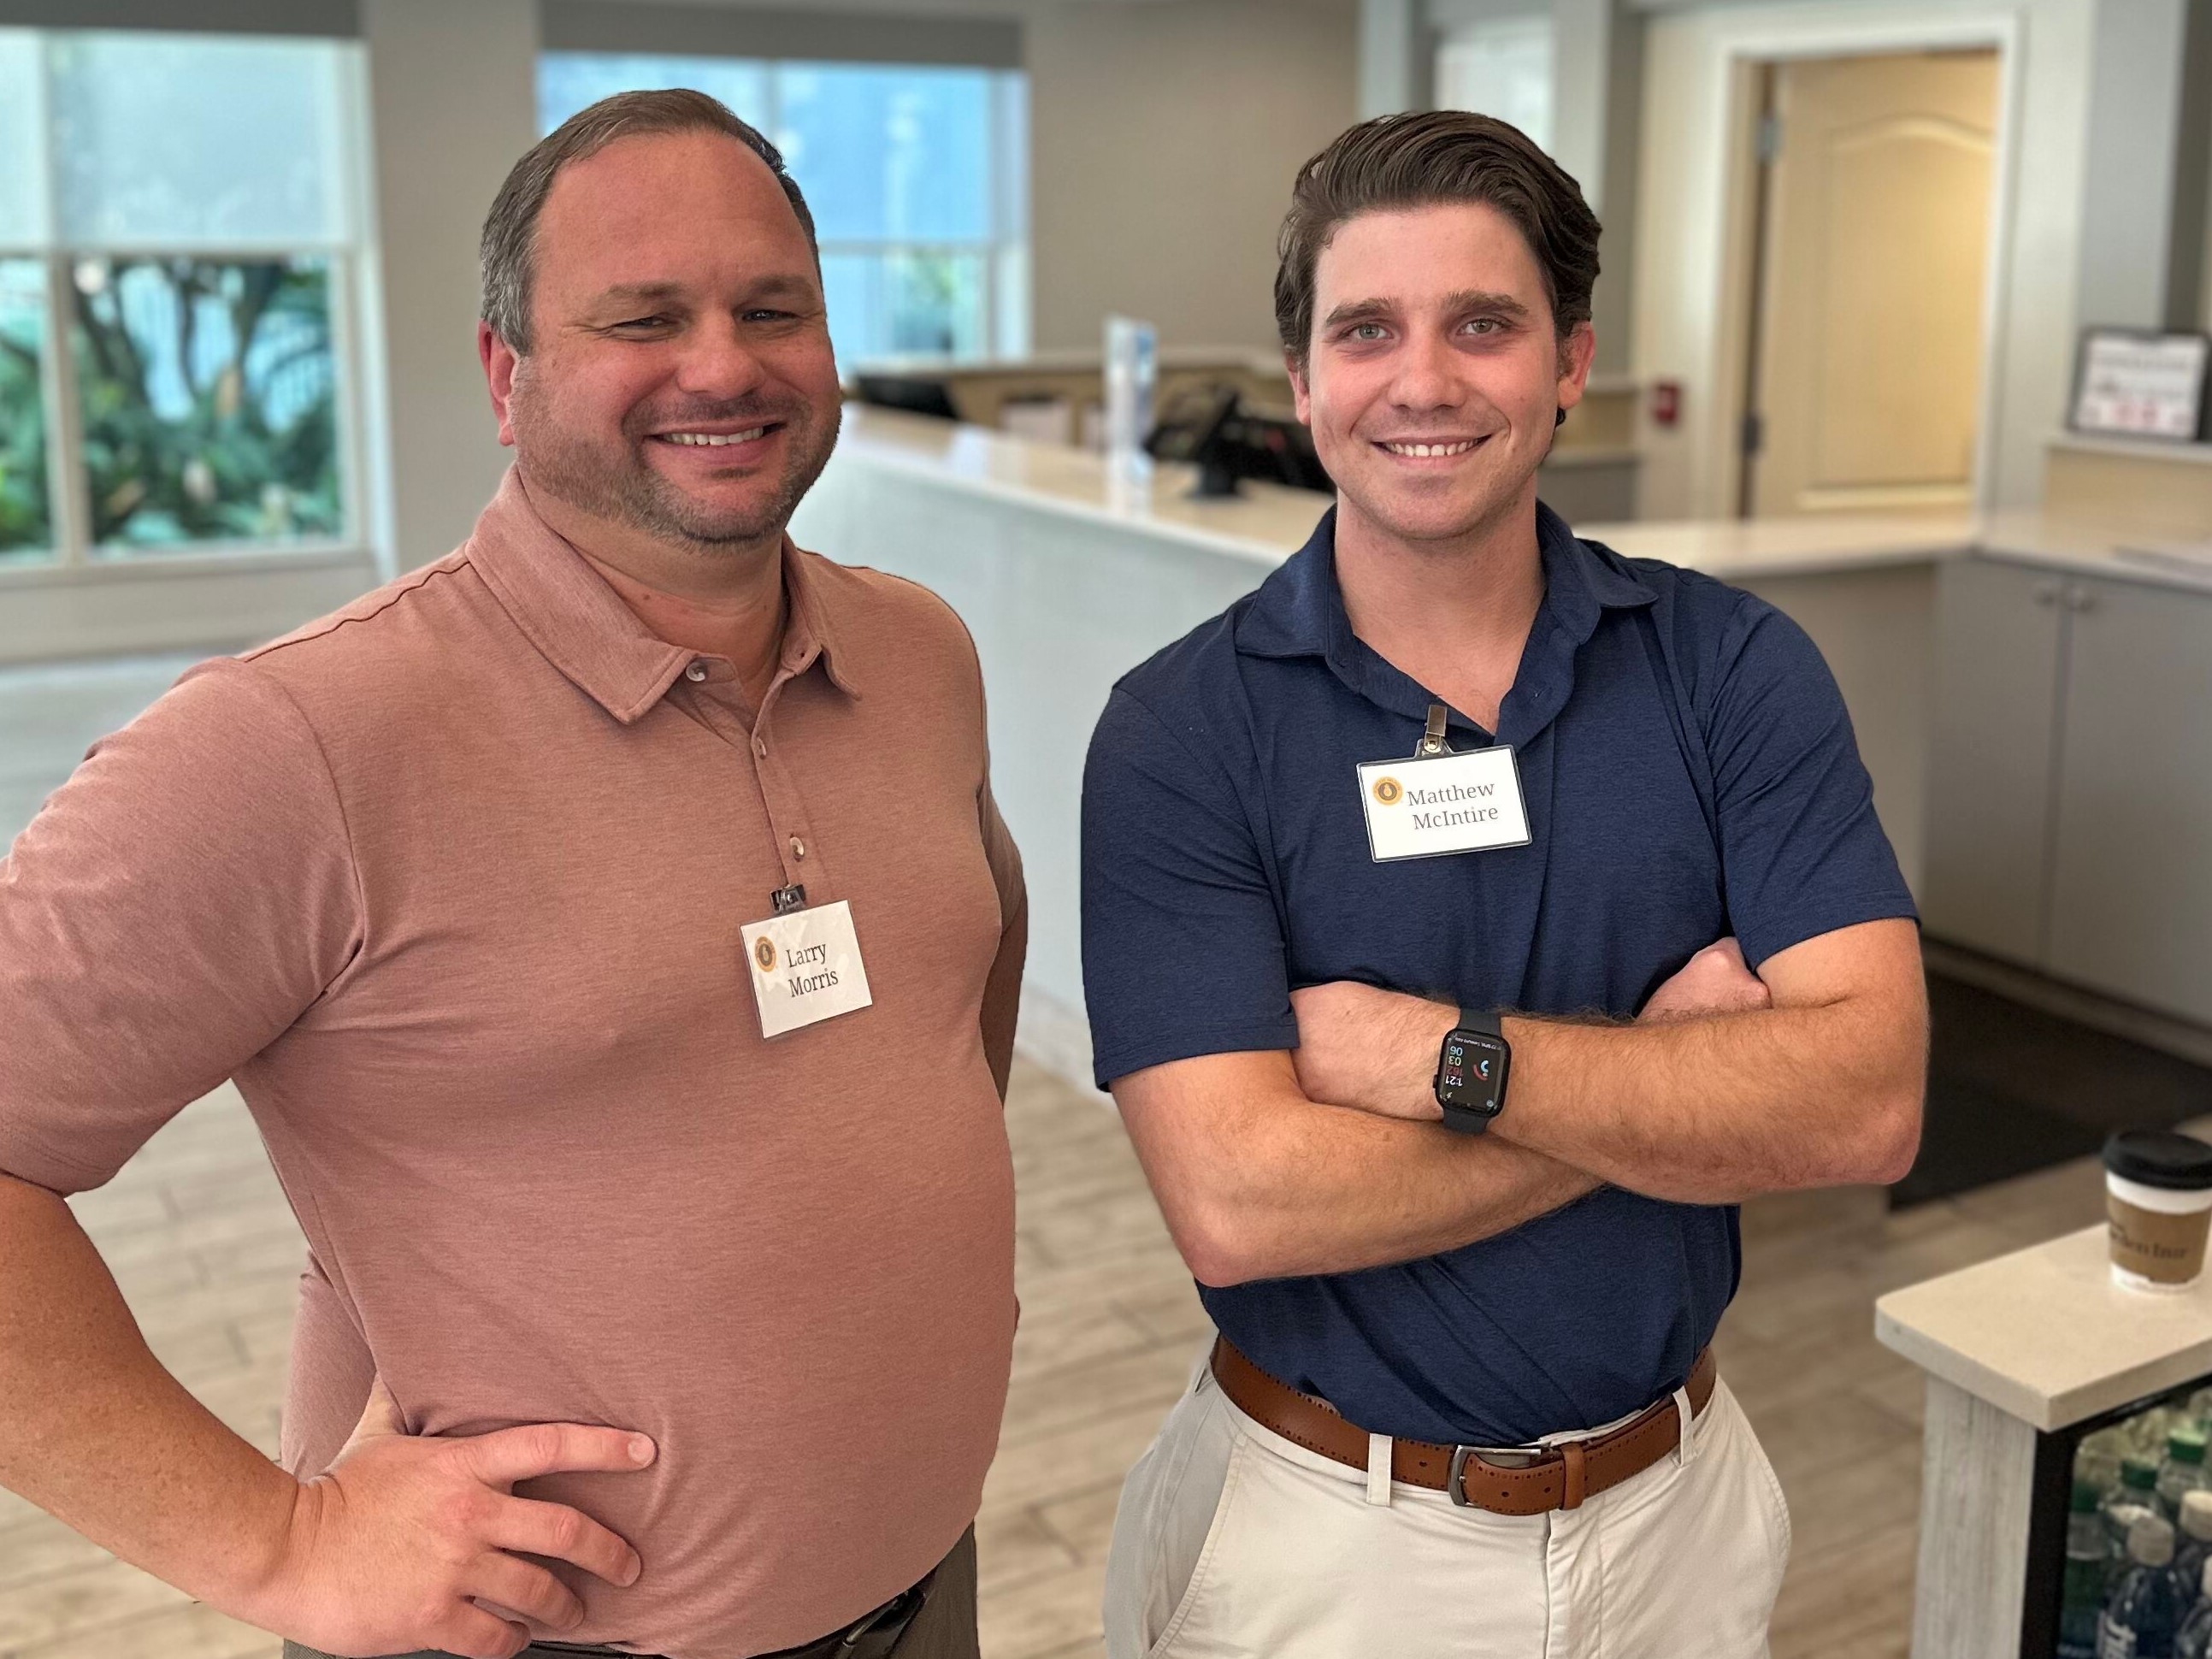 Two Sales Team Members Posing Together at Training